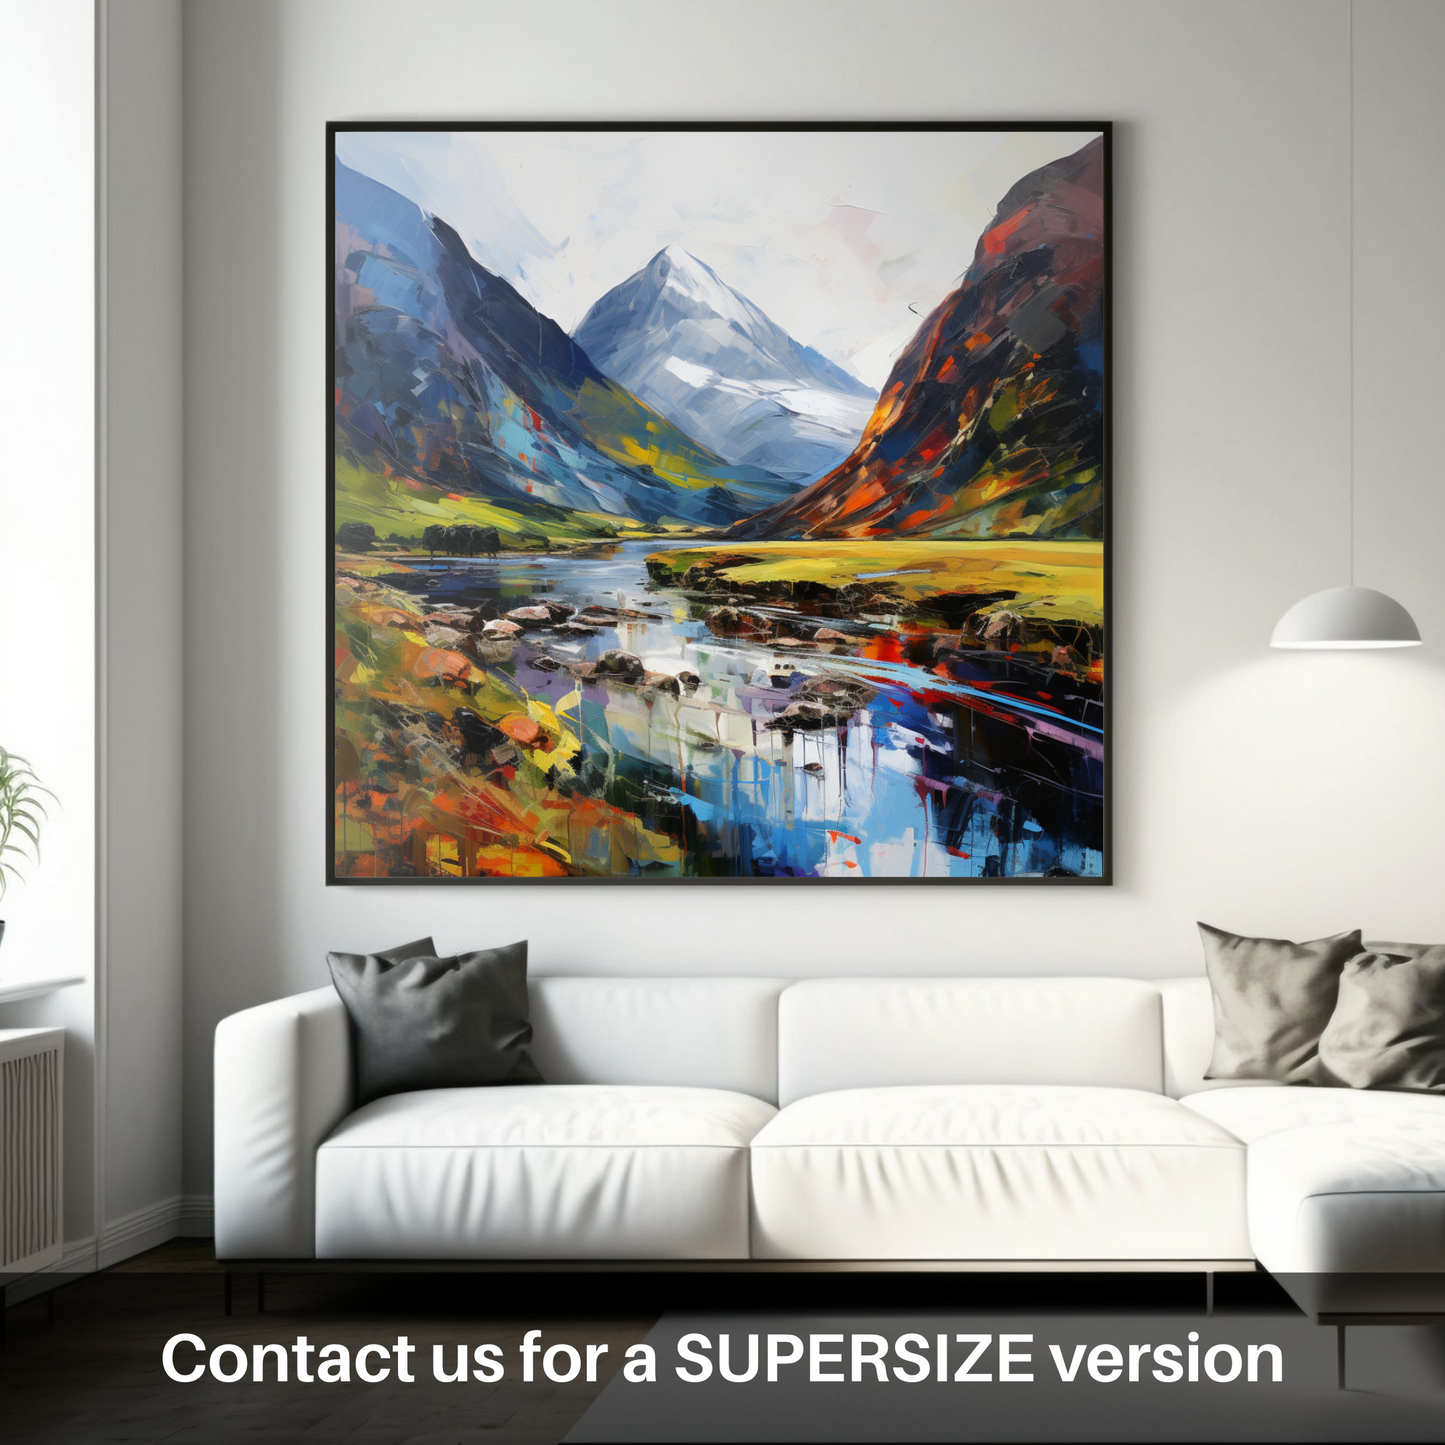 Painting and Art Print of Glencoe, Argyll and Bute. Expressionist Dance of Glencoe's Light and Shadow.